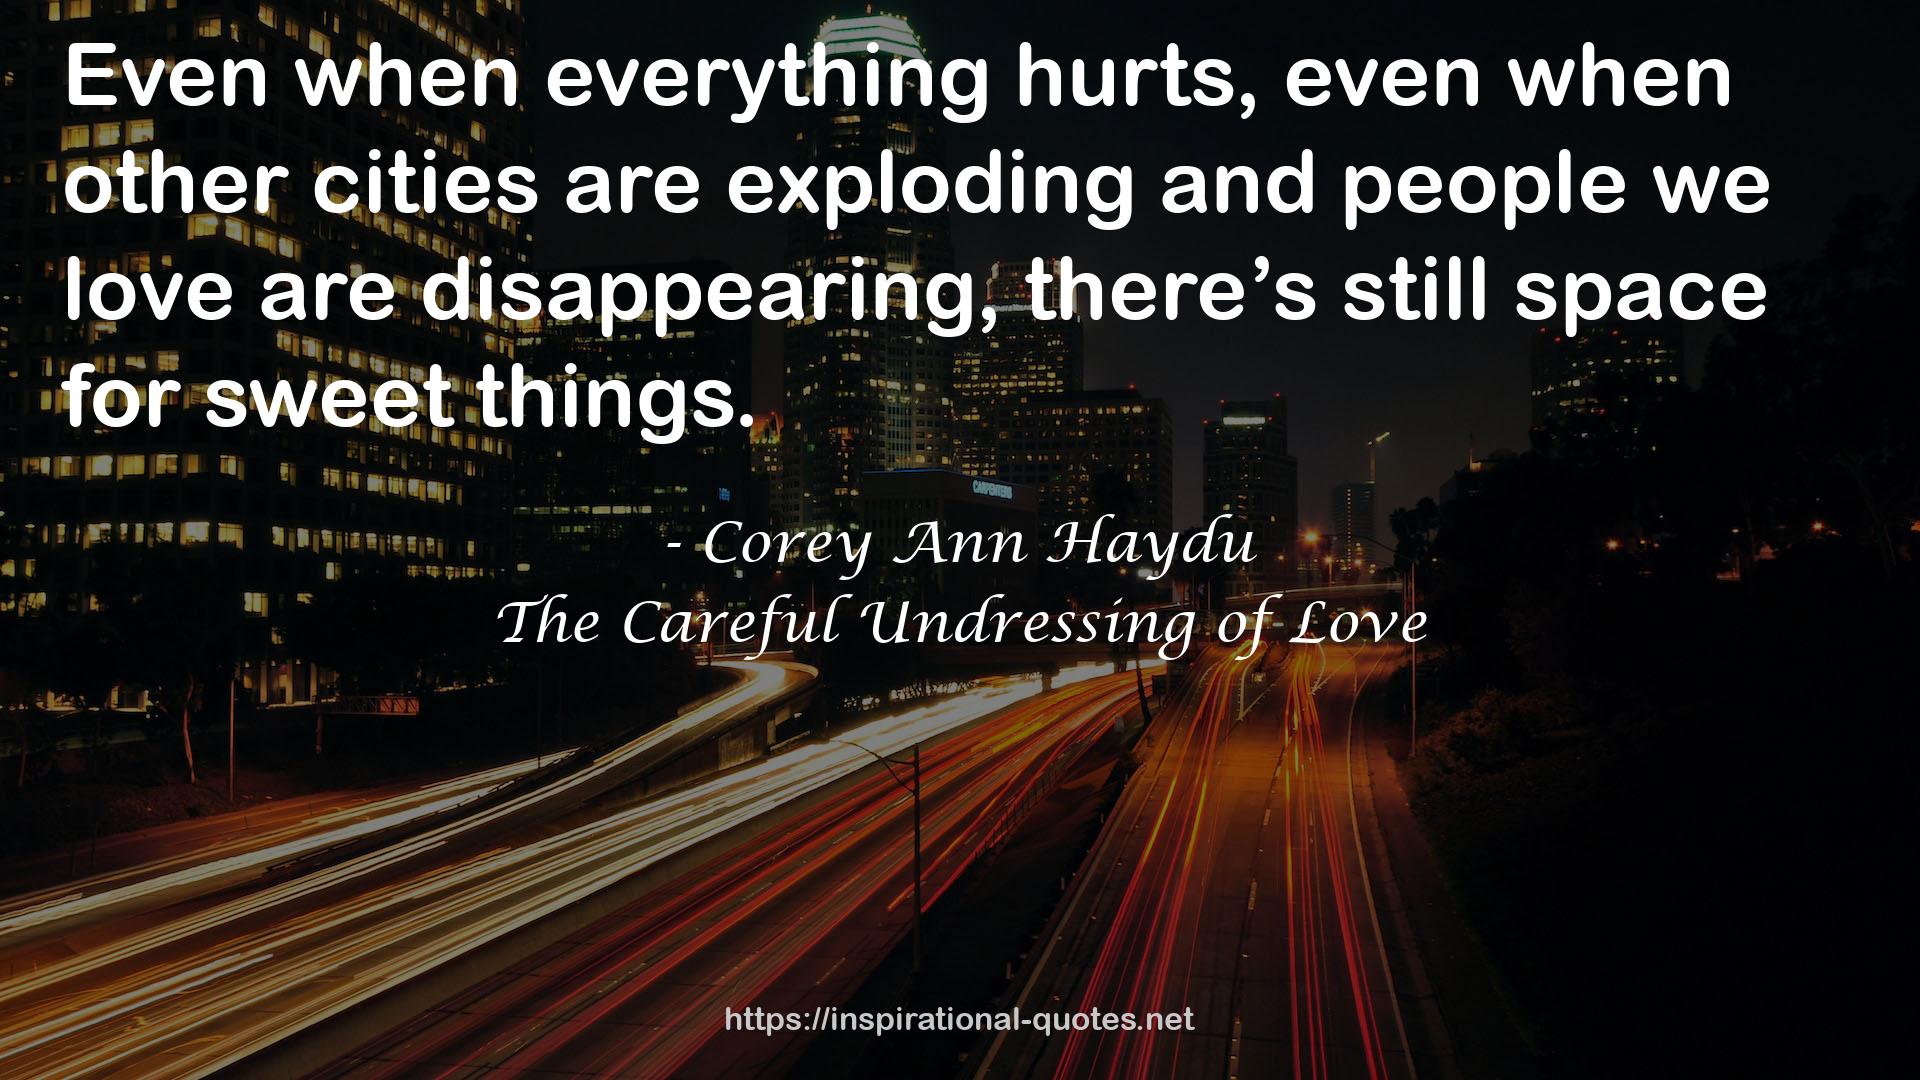 The Careful Undressing of Love QUOTES